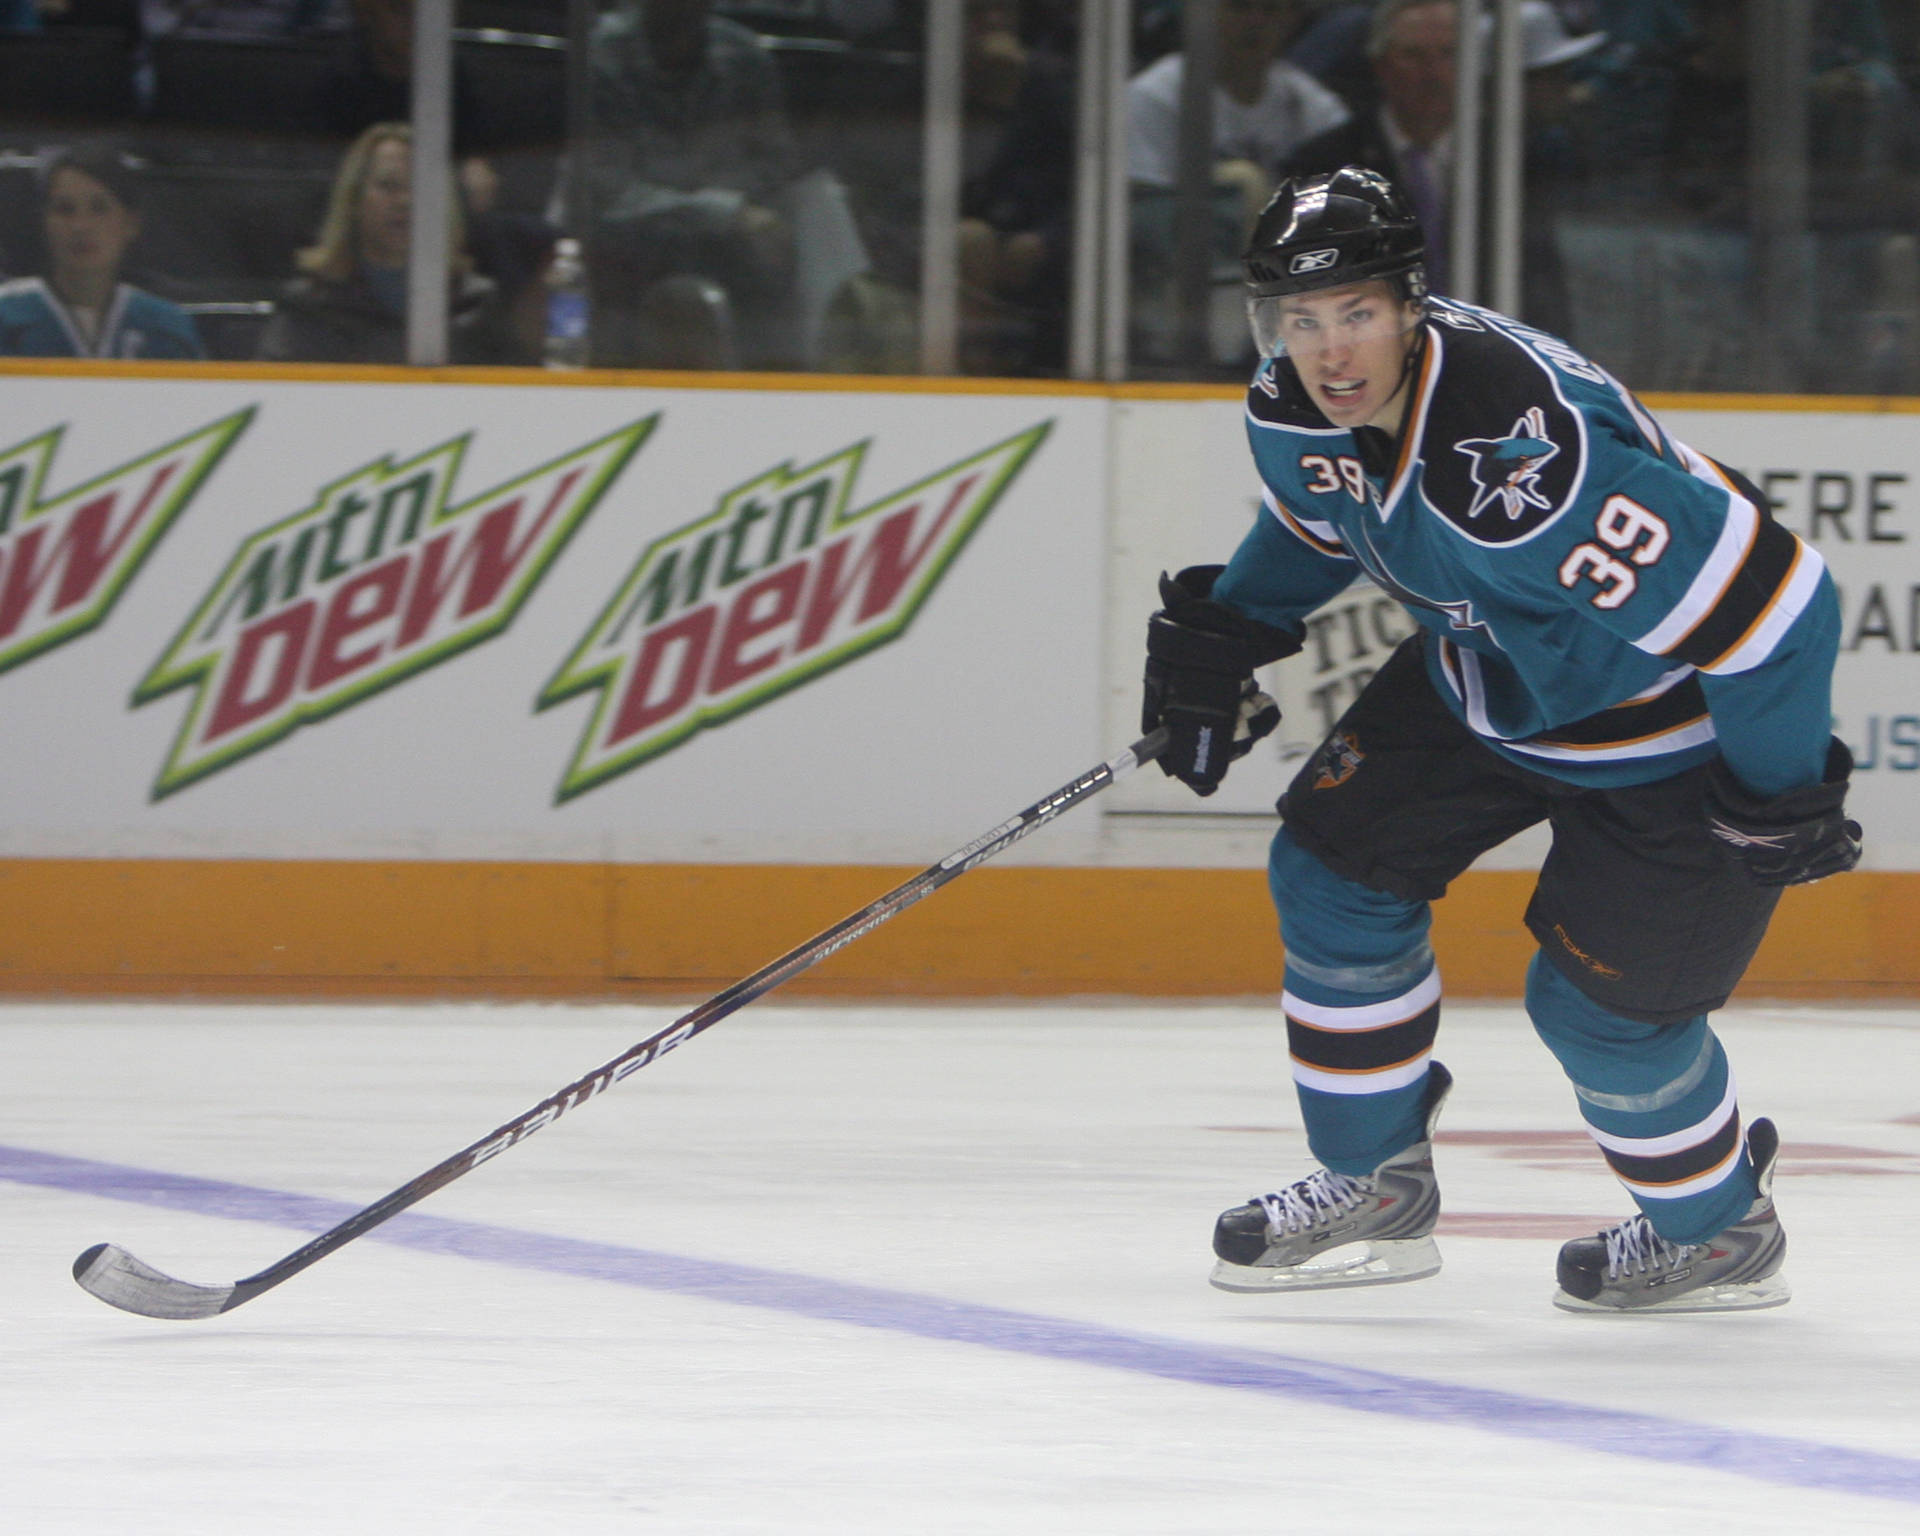 Canadian Professional Ice Hockey Center Logan Couture On Rink Wallpaper